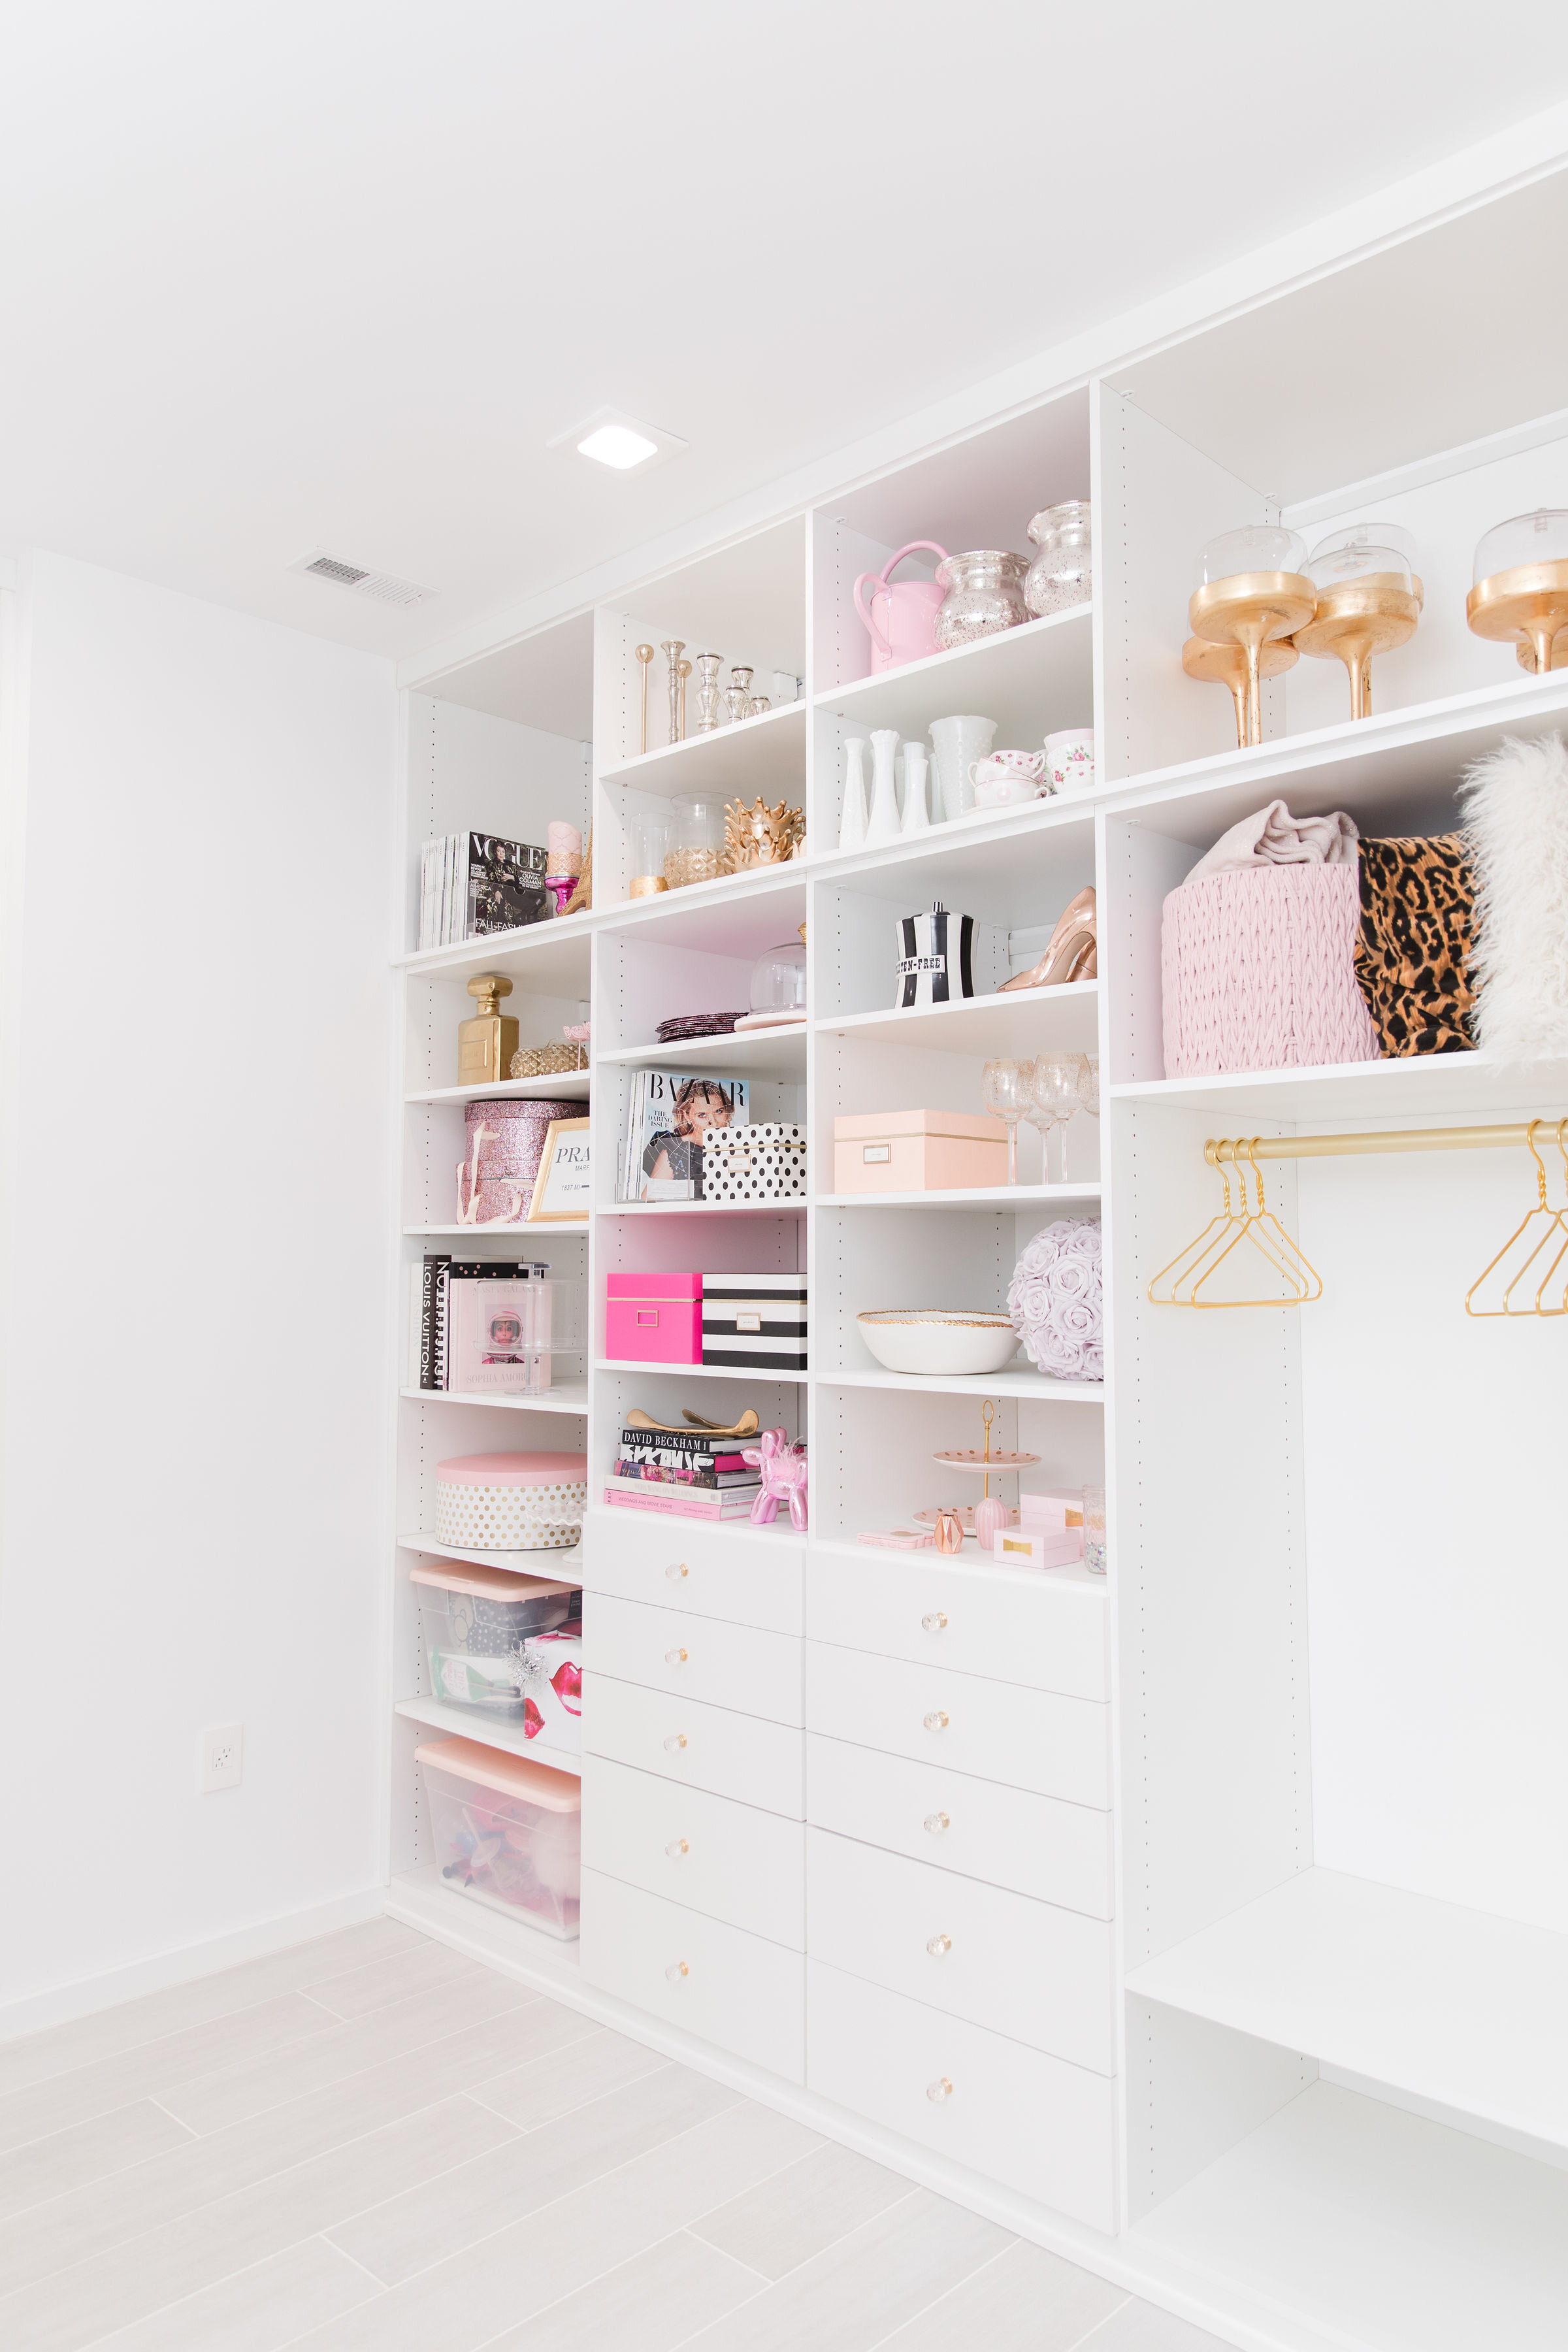 POSH-PR-The-Caroline-Doll-Barbie-Office-Pink-Style-Boss-Goals-At-Home-Workspace-Luxury-Fashion-Infused-Office-The-Doll-HQ-Organized-Storage-Room-Office-Goals-California-Closets-Custom-Cabinets-Acrylic-Crystal-Details-2.jpg